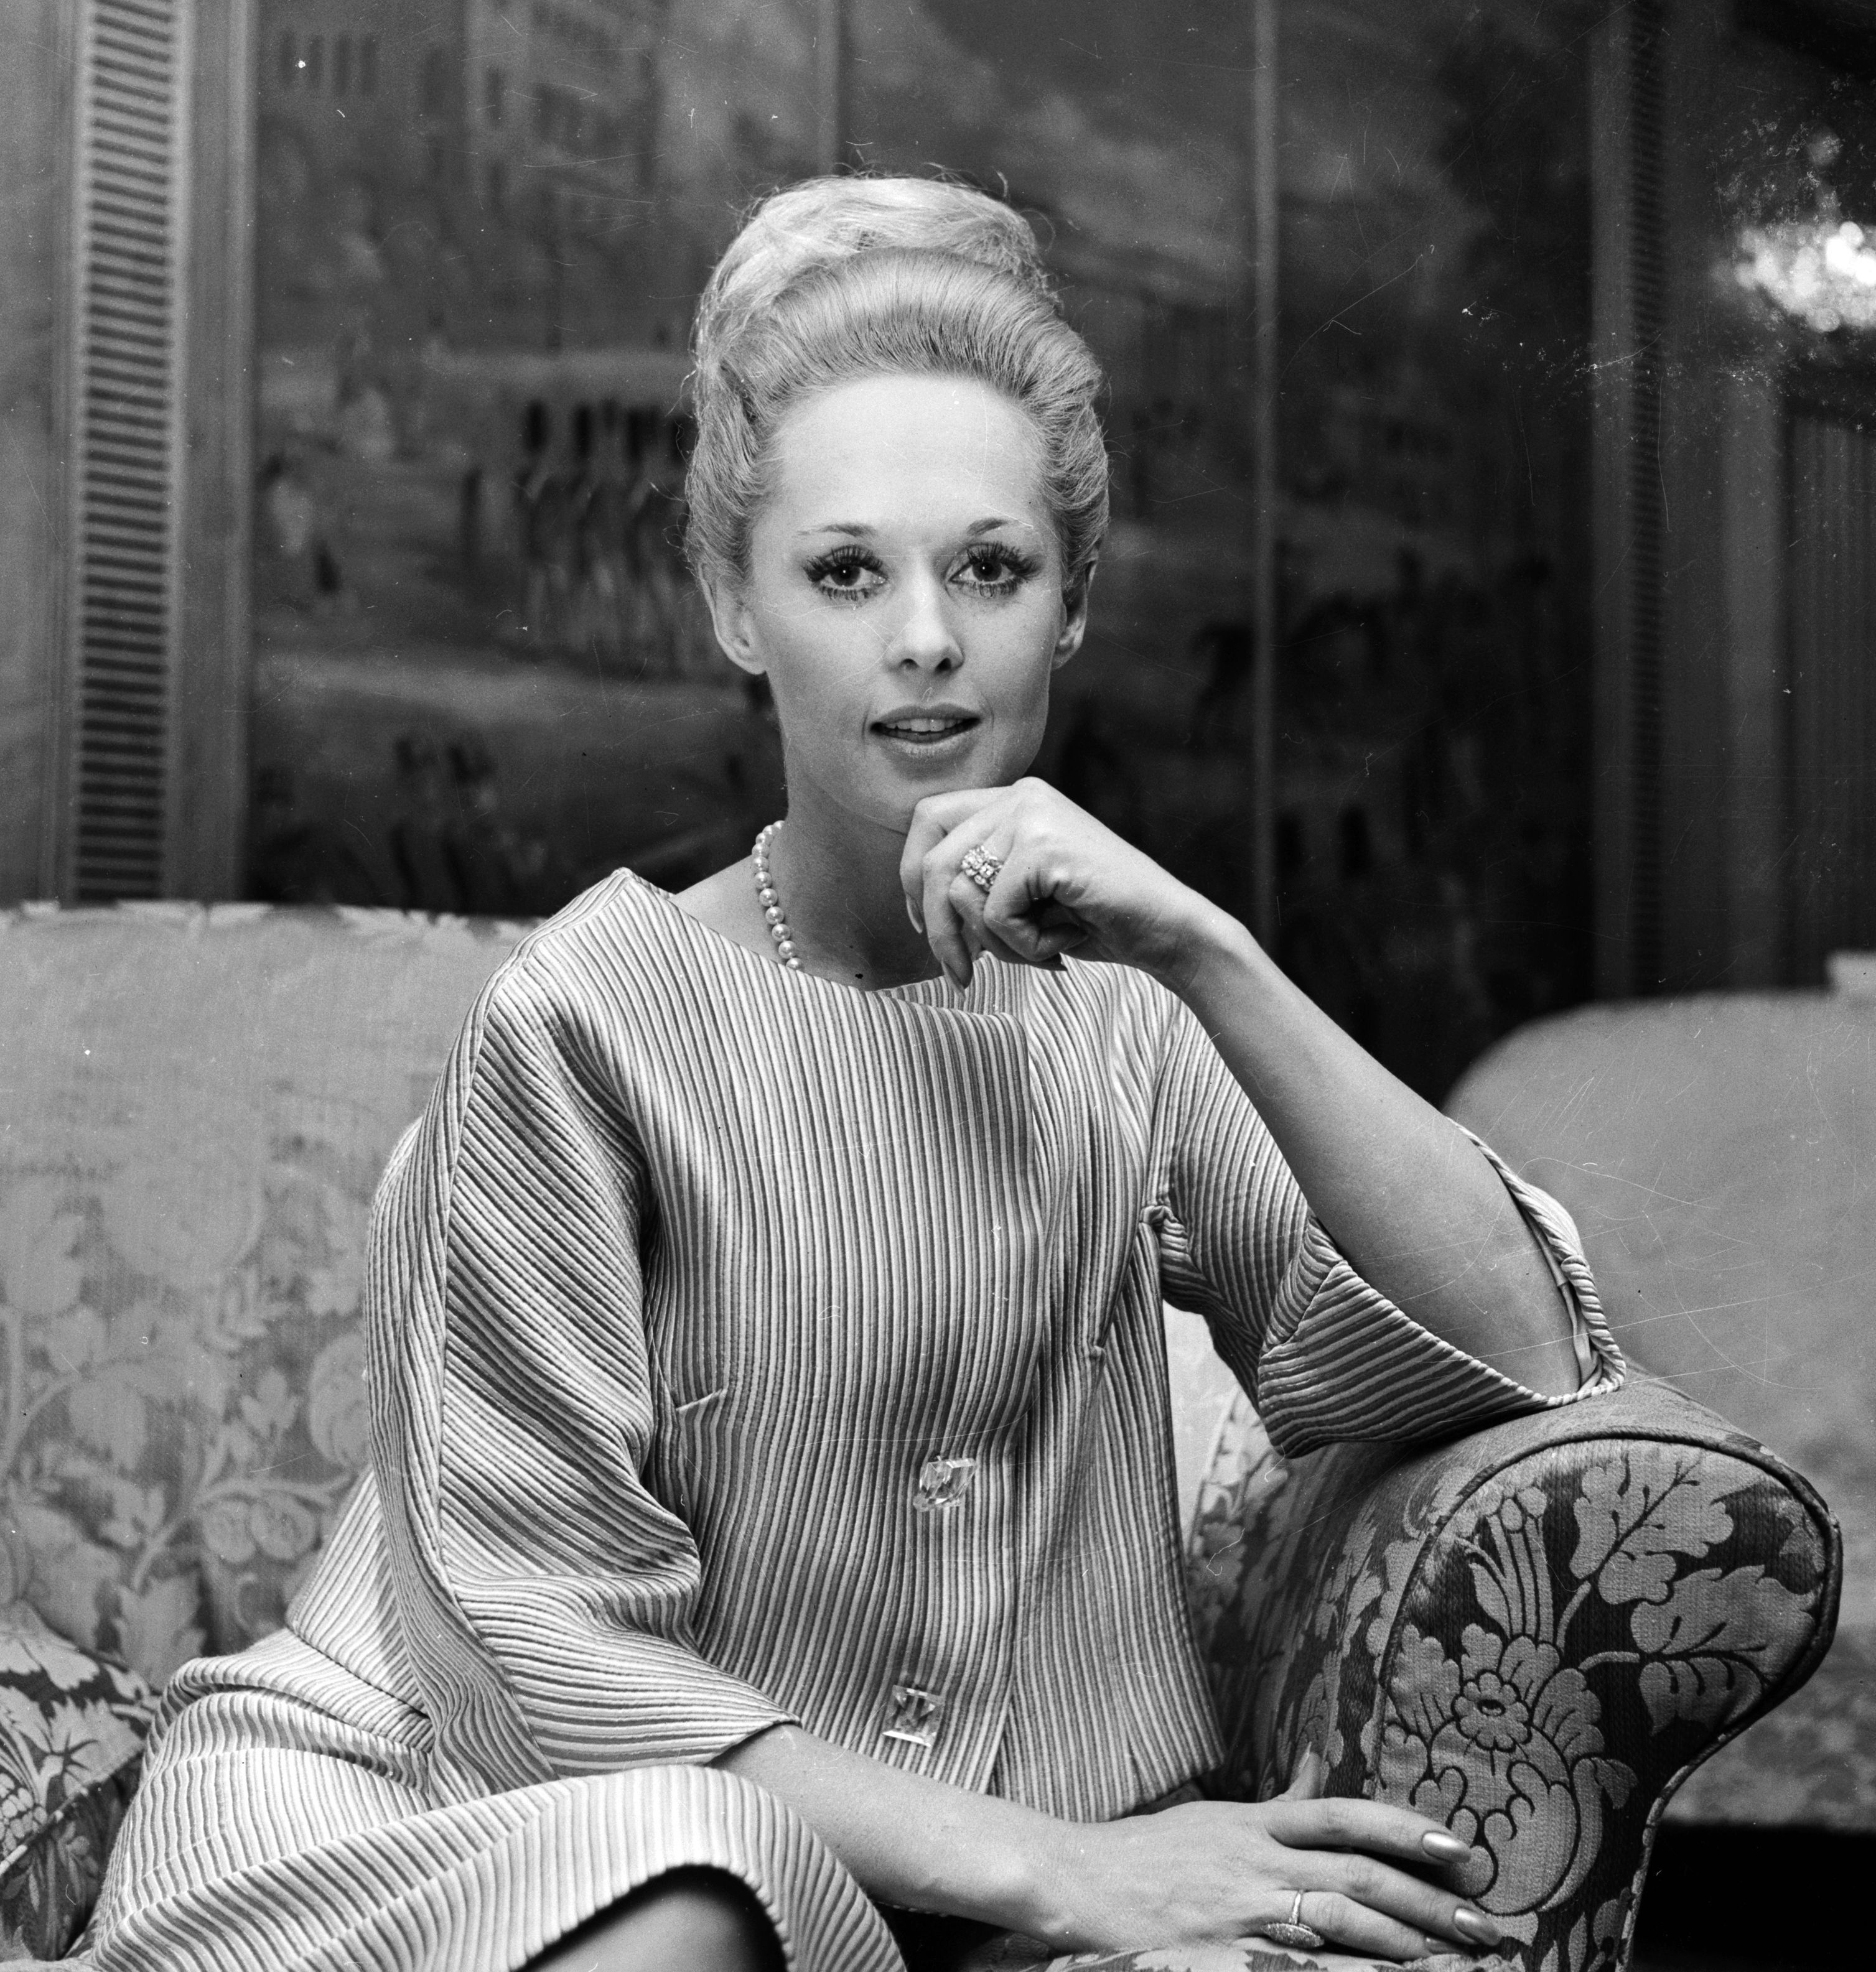 Tippi Hedren attends a press conference at the Dorchester Hotel in London, on March 1, 1966. | Source: Getty Images